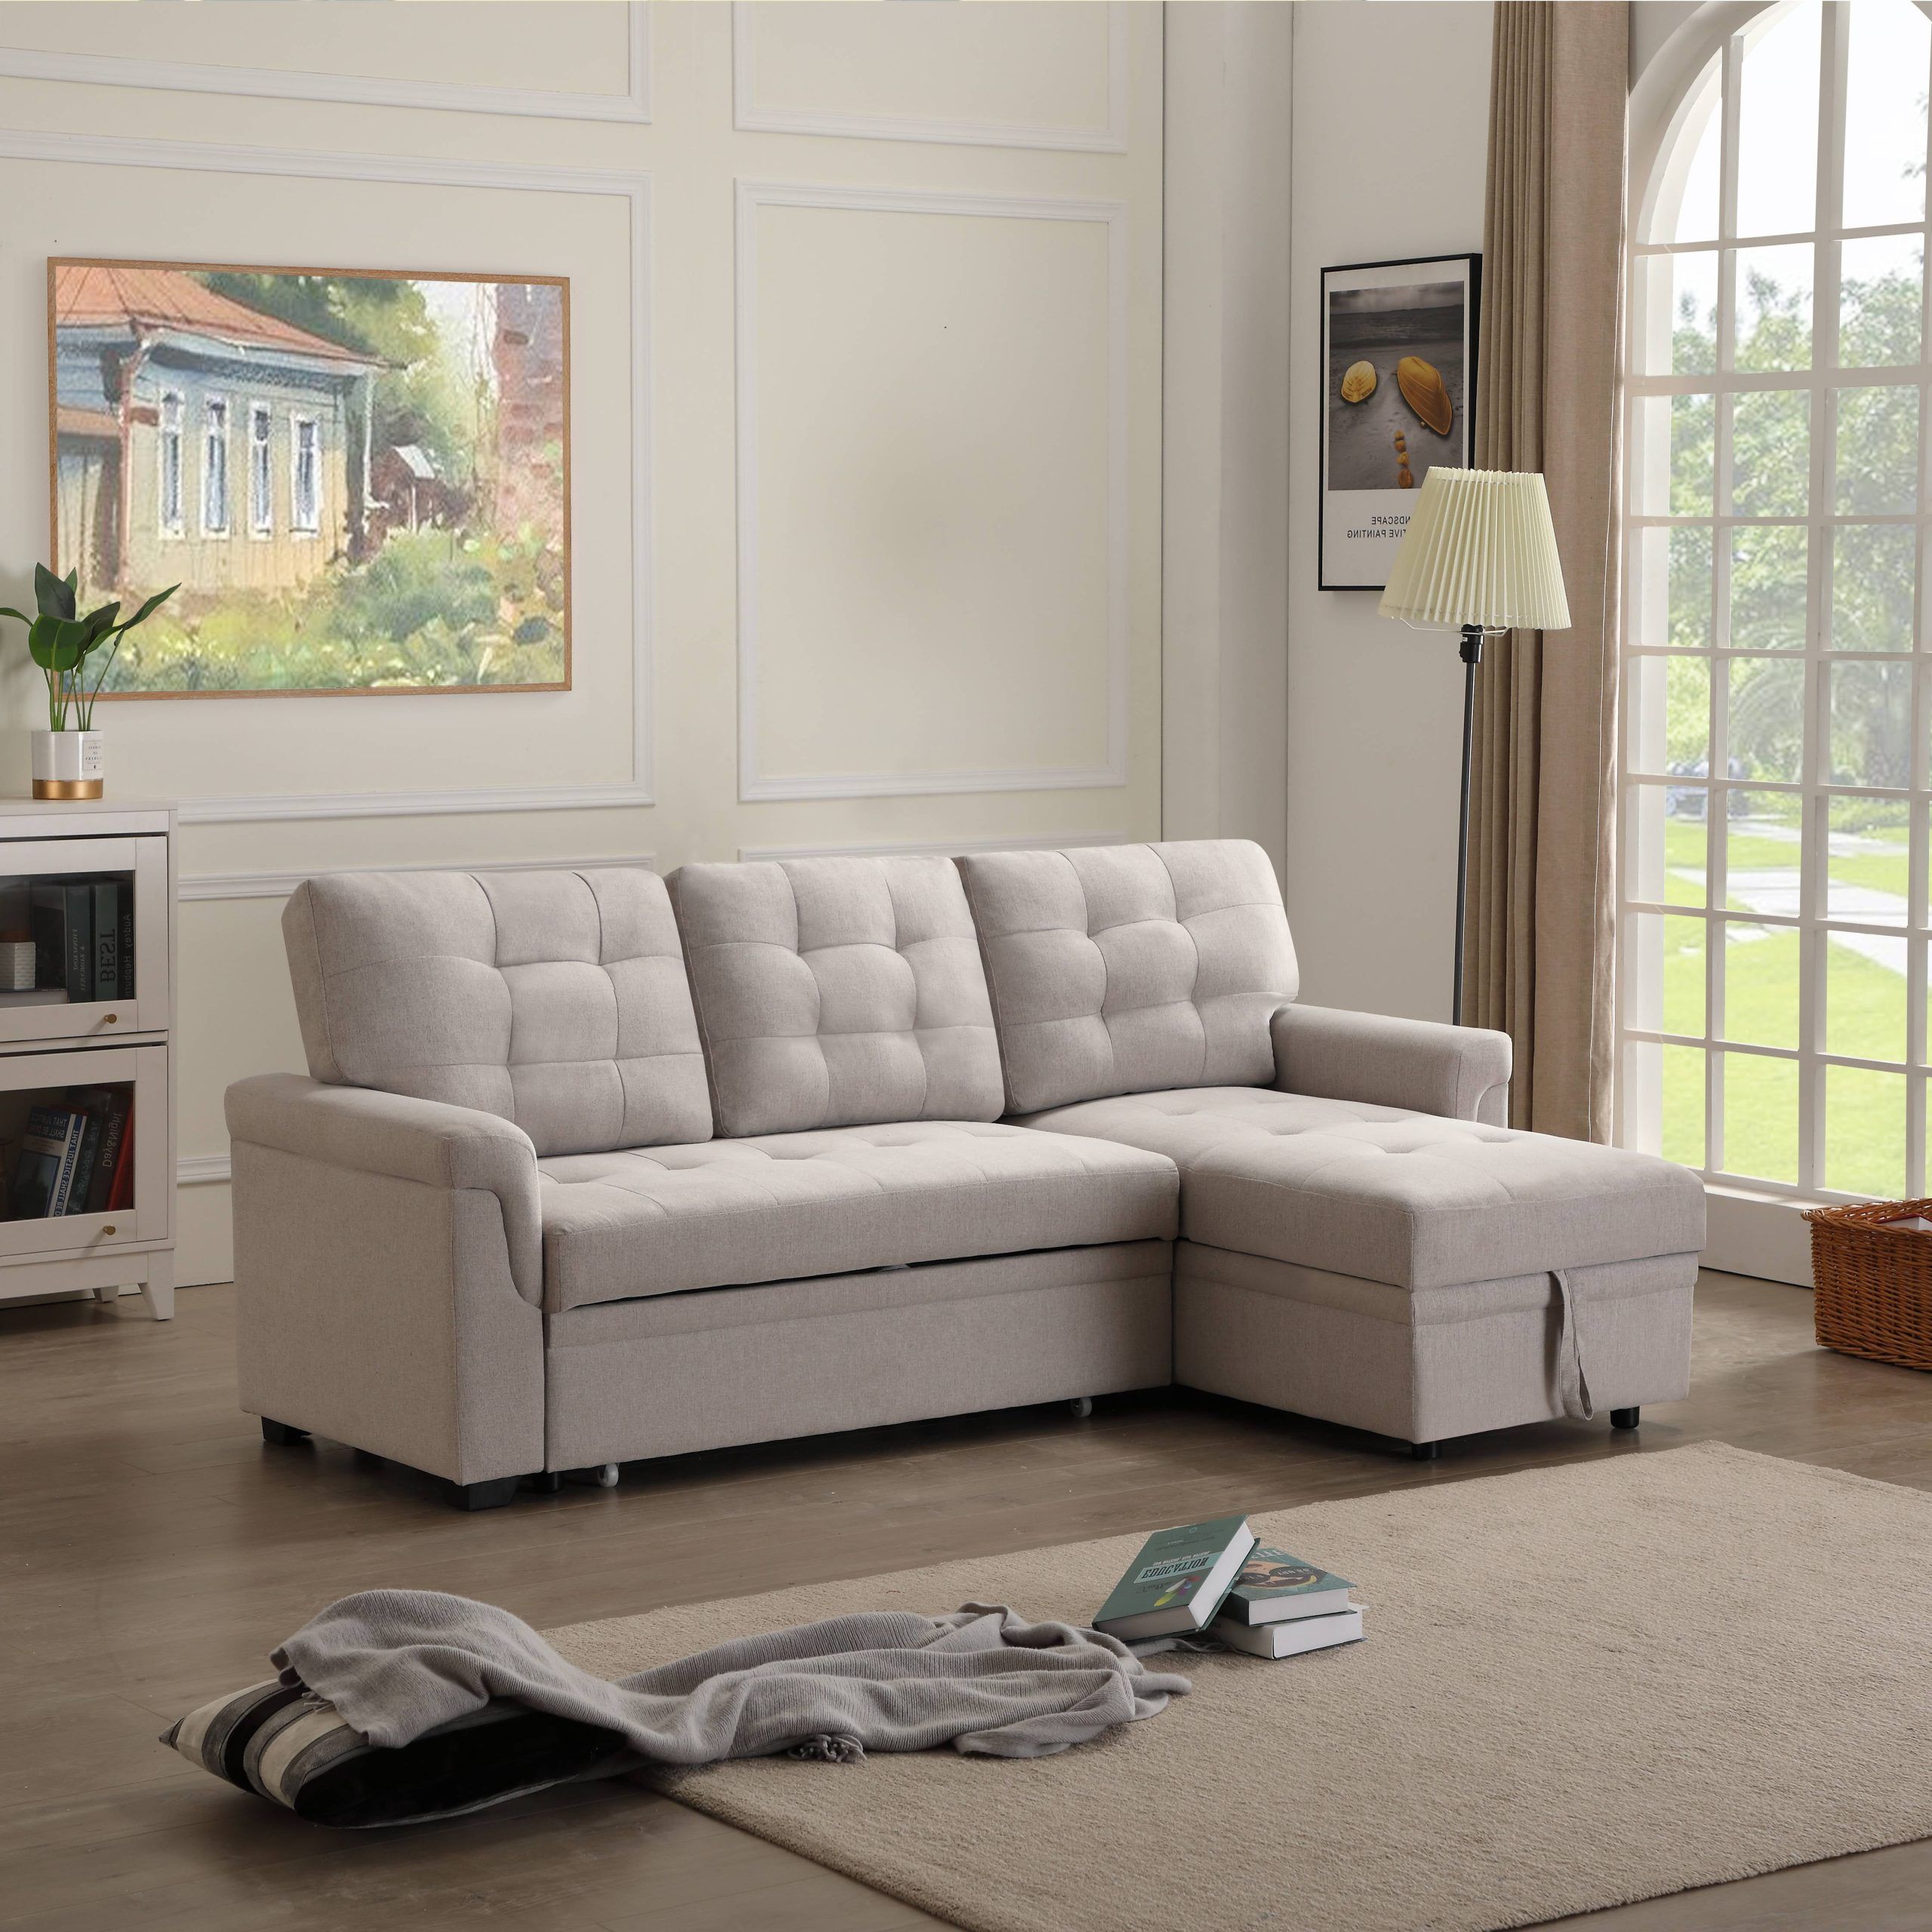 Well Known Beige L Shaped Sectional Sofas In L Shaped Sectional Sofa Bed With Reversible Chaise, 86"w Modern 3 Seat (View 6 of 15)